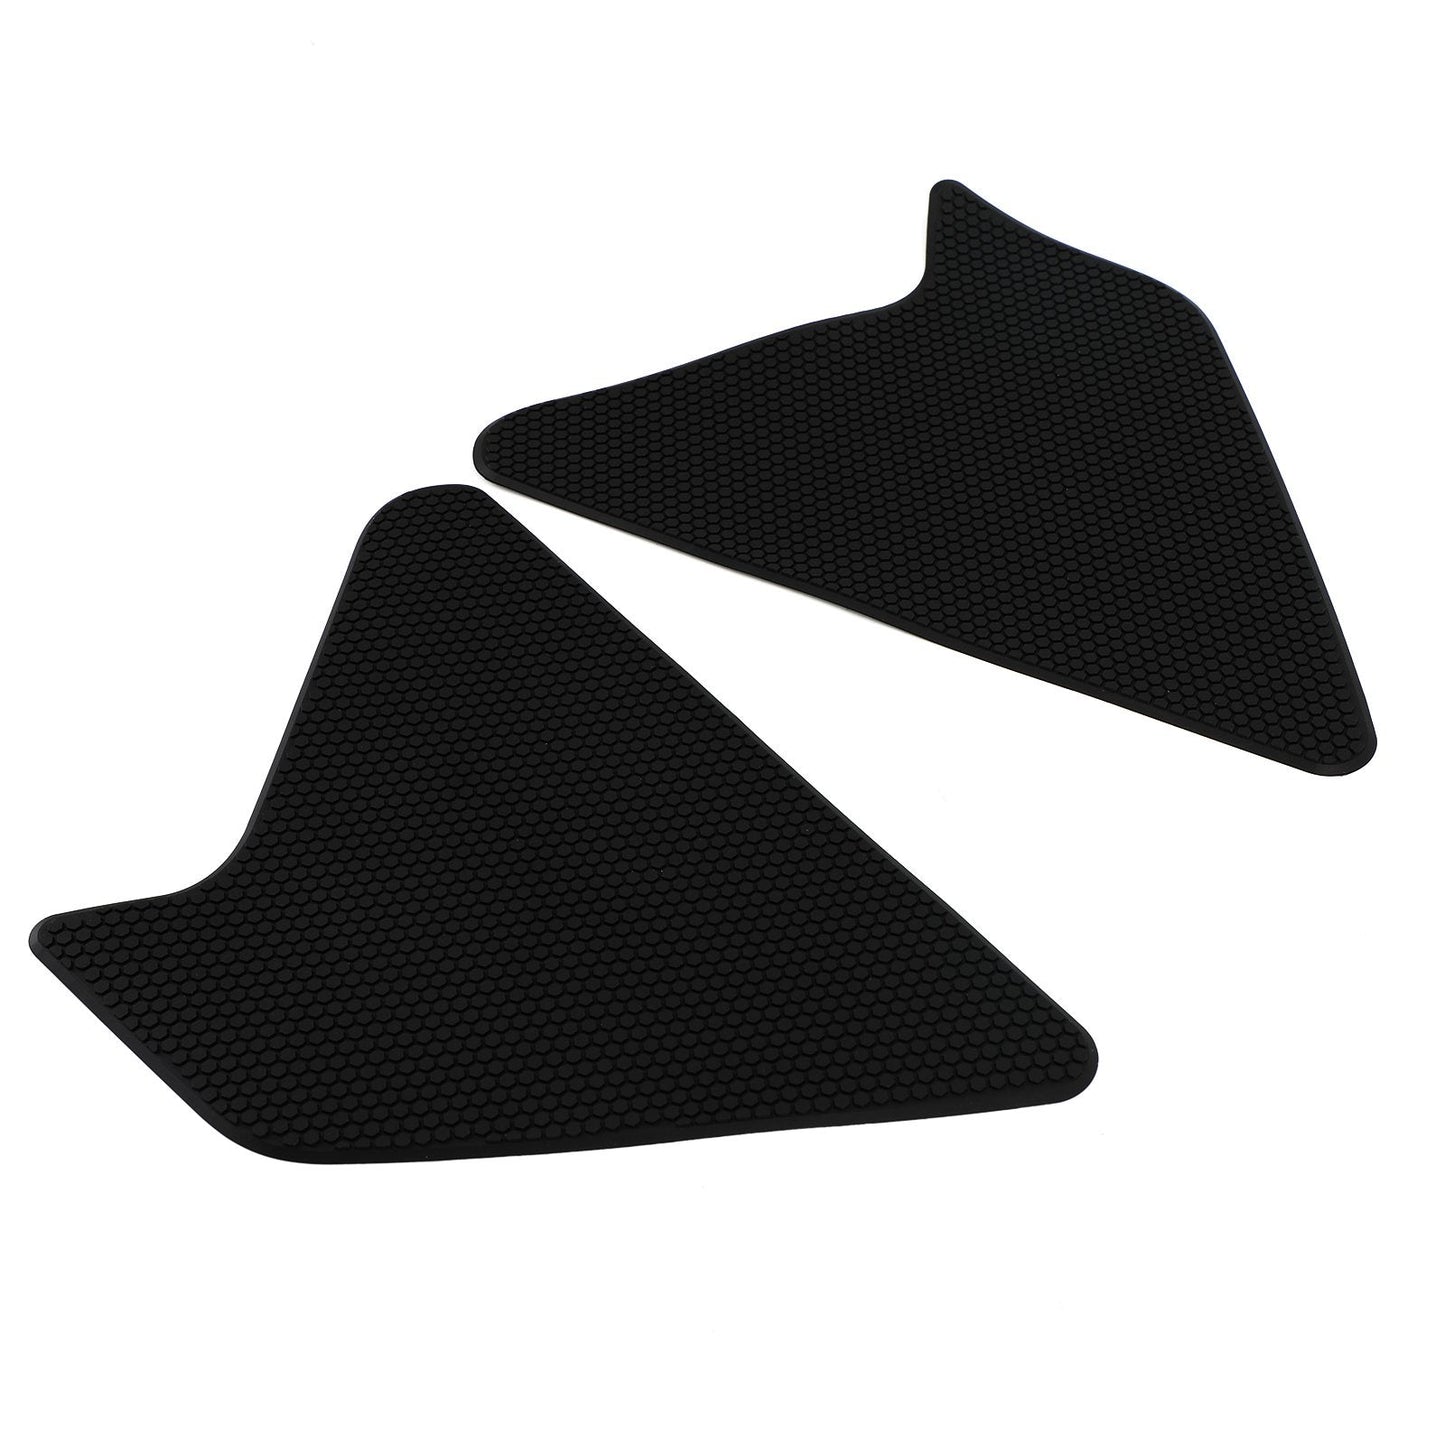 2x Side Tank Traction Grips Pads Fit for Yamaha XT1200Z Super Tenere 12-2019